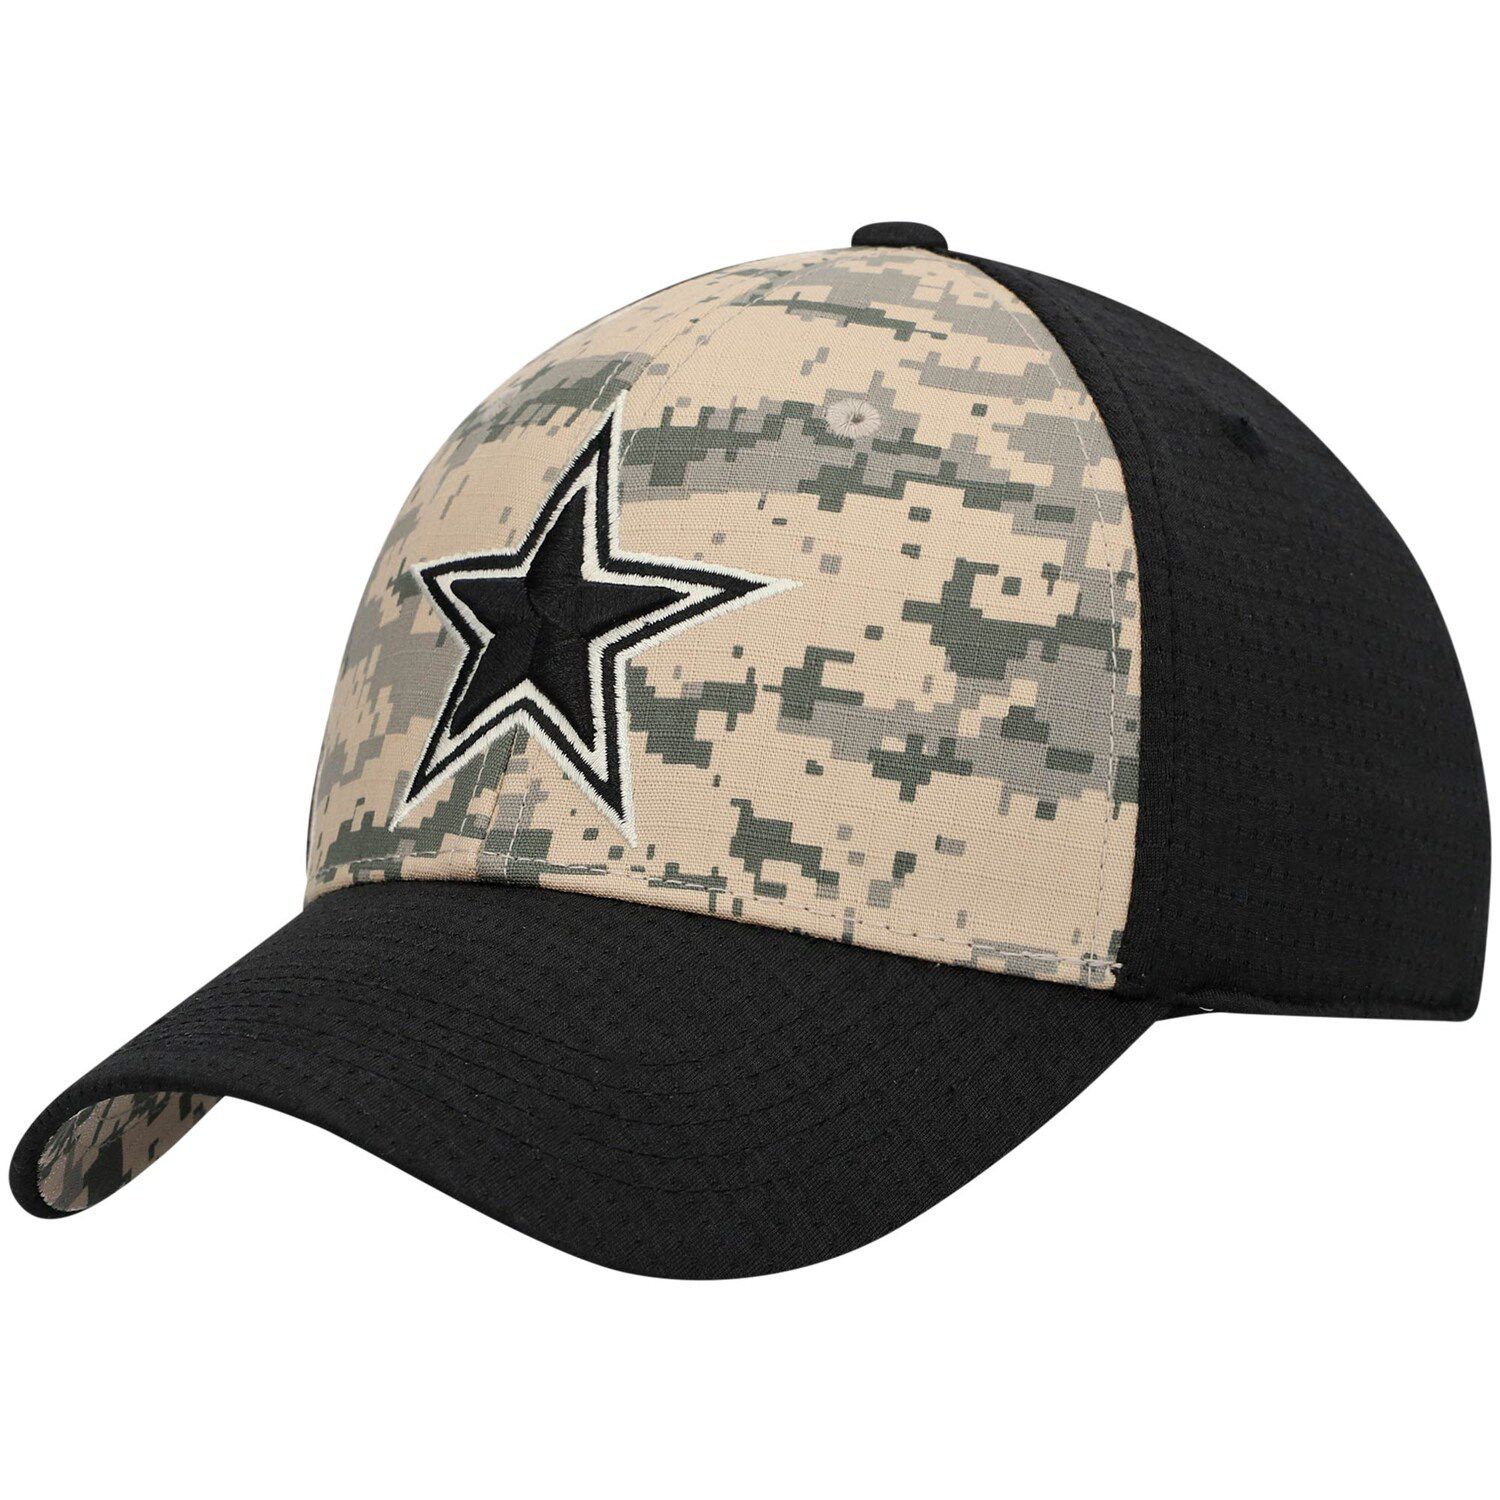 Image for Unbranded Men's Camo Dallas Cowboys Freedom 60 Flex Hat at Kohl's.